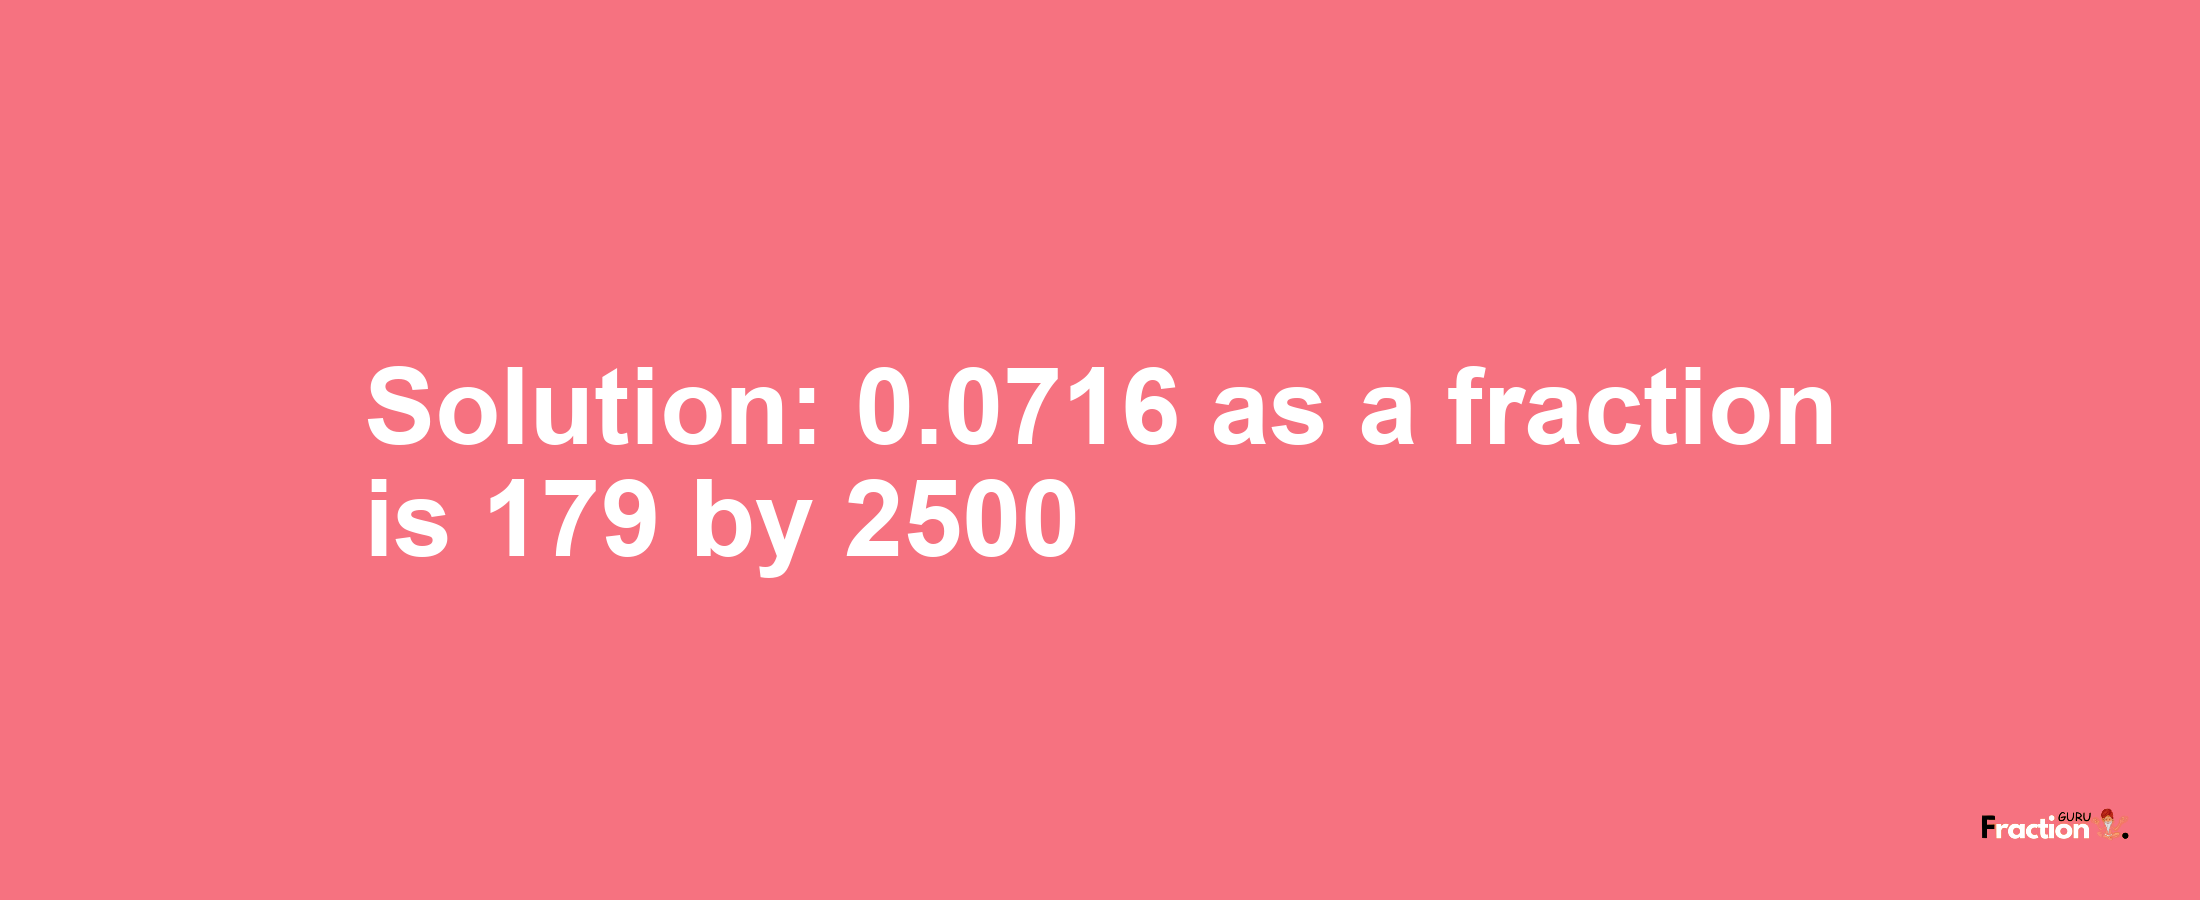 Solution:0.0716 as a fraction is 179/2500